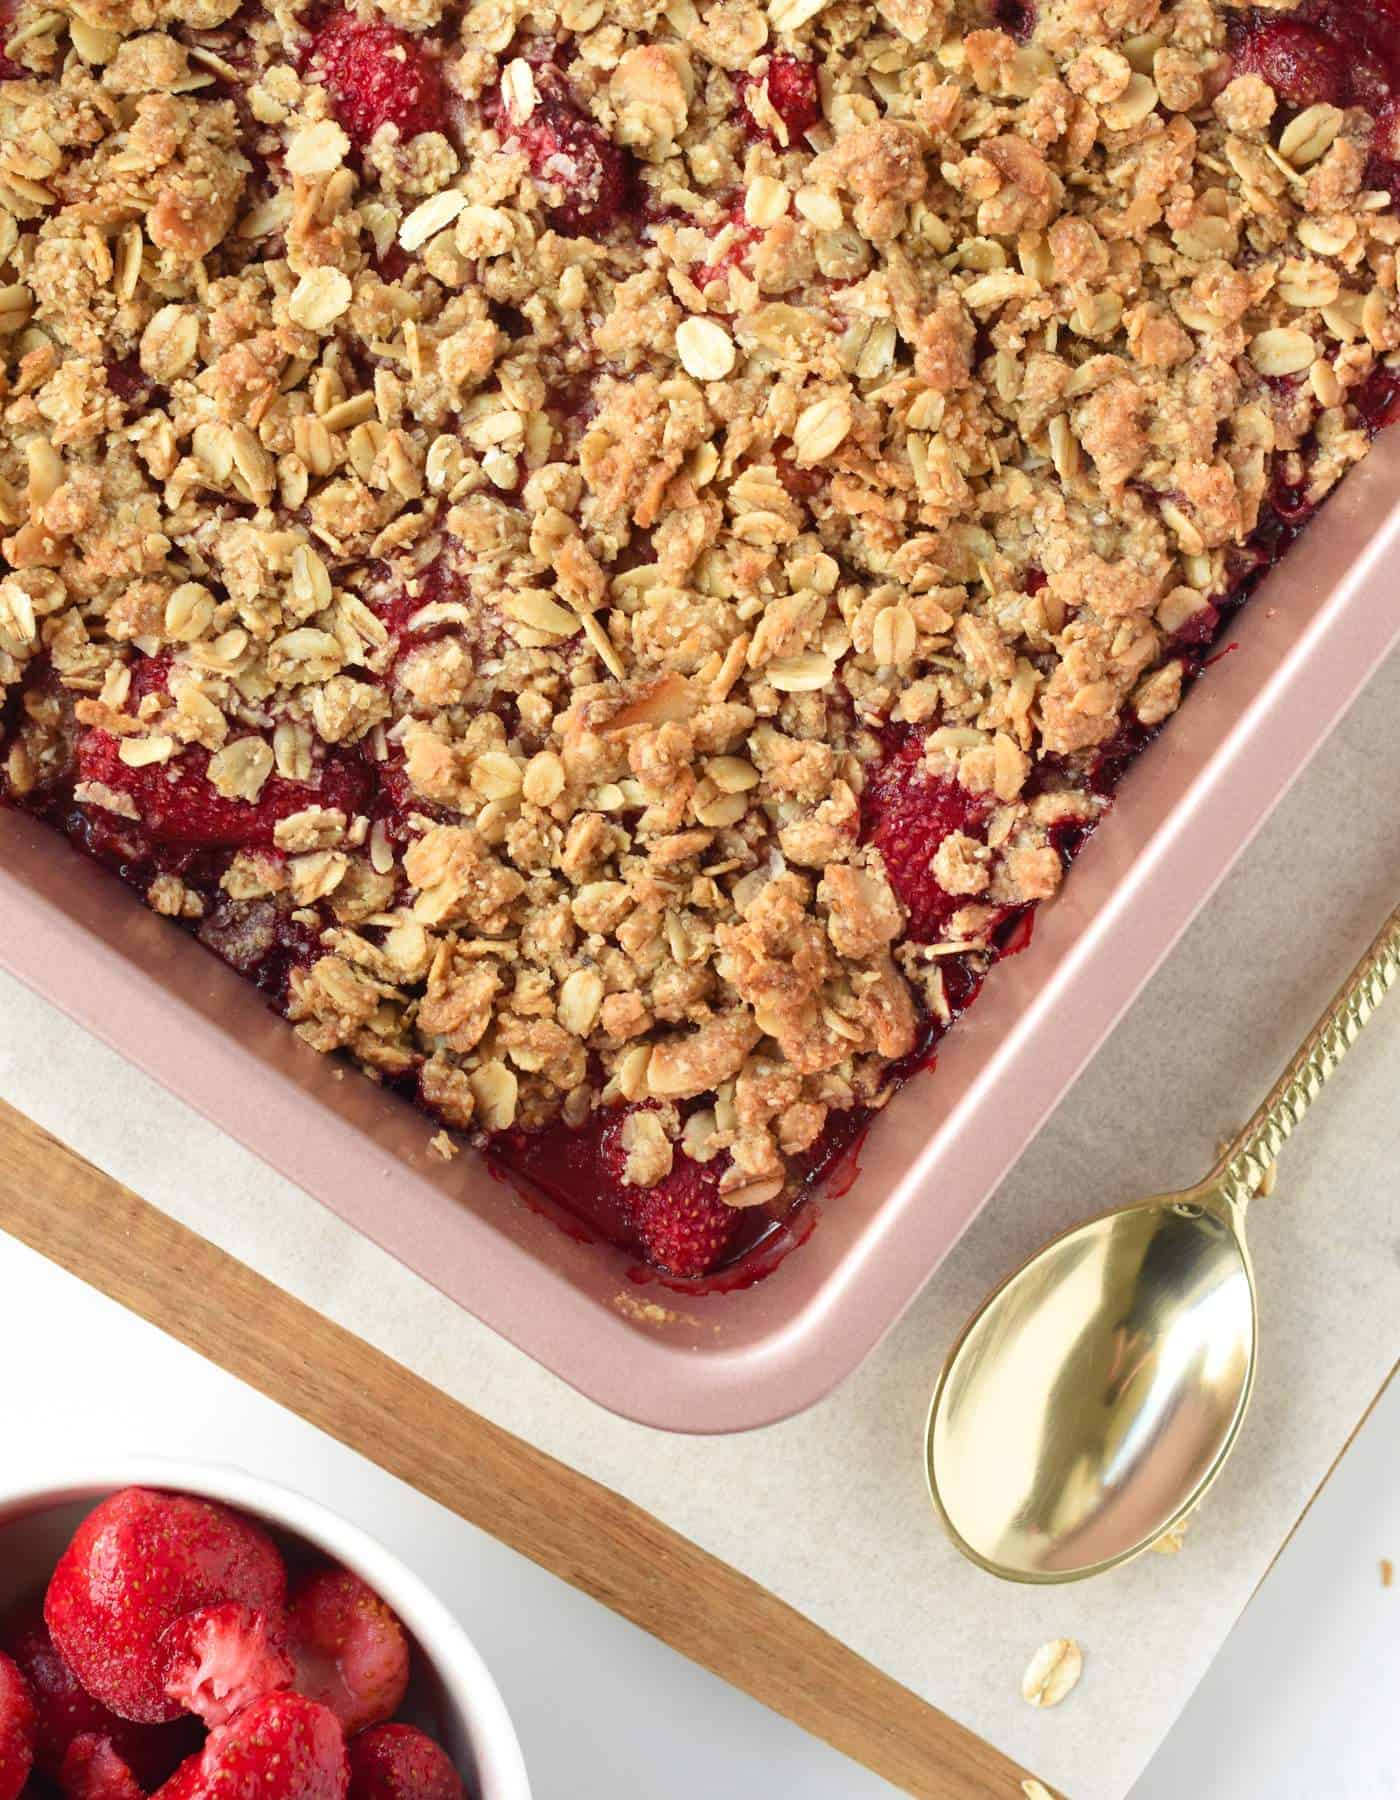 Strawberry Crisp in a large baking tray next to a golden spoon.